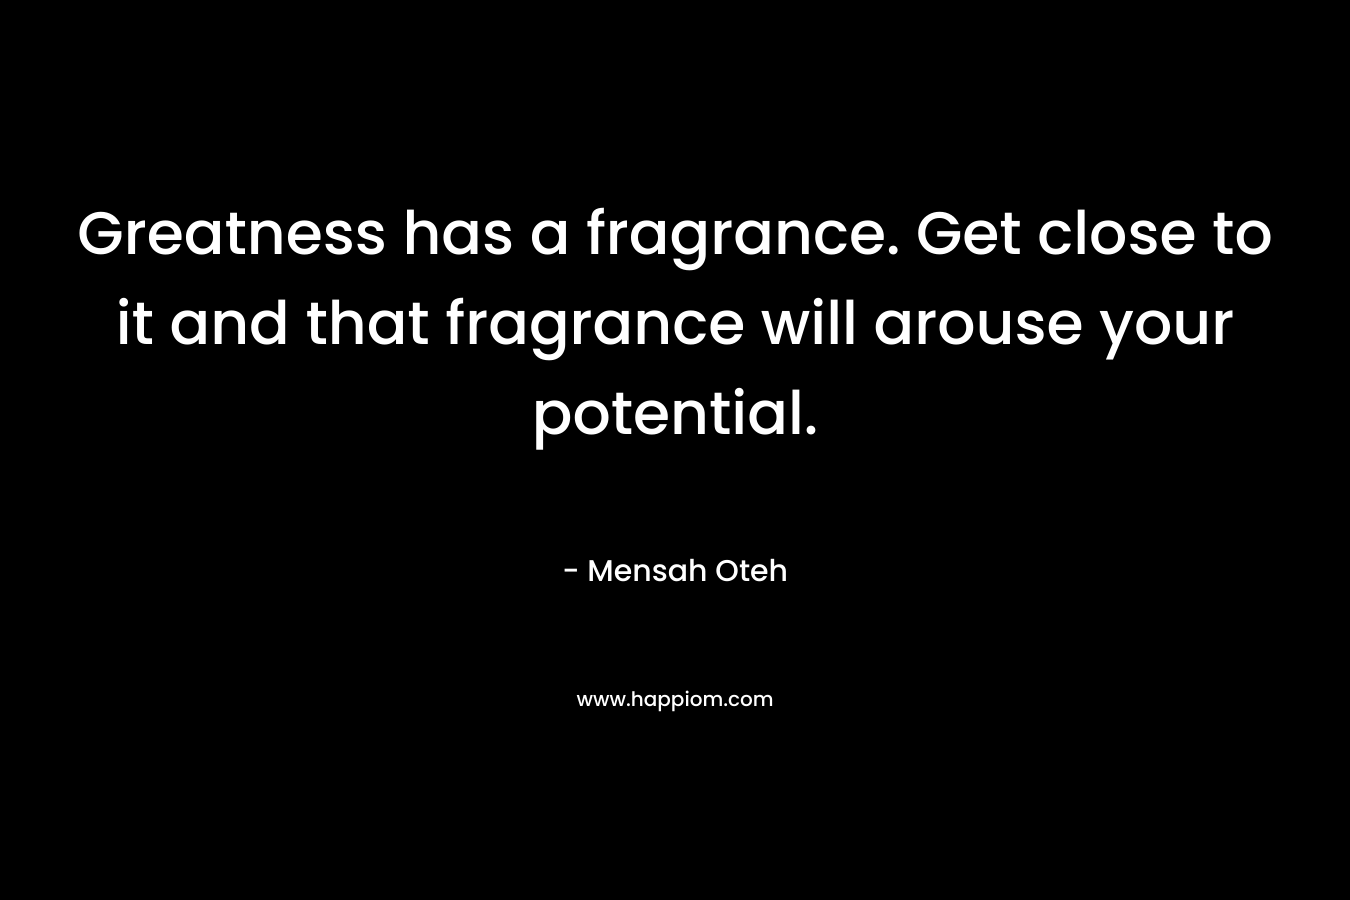 Greatness has a fragrance. Get close to it and that fragrance will arouse your potential. – Mensah Oteh